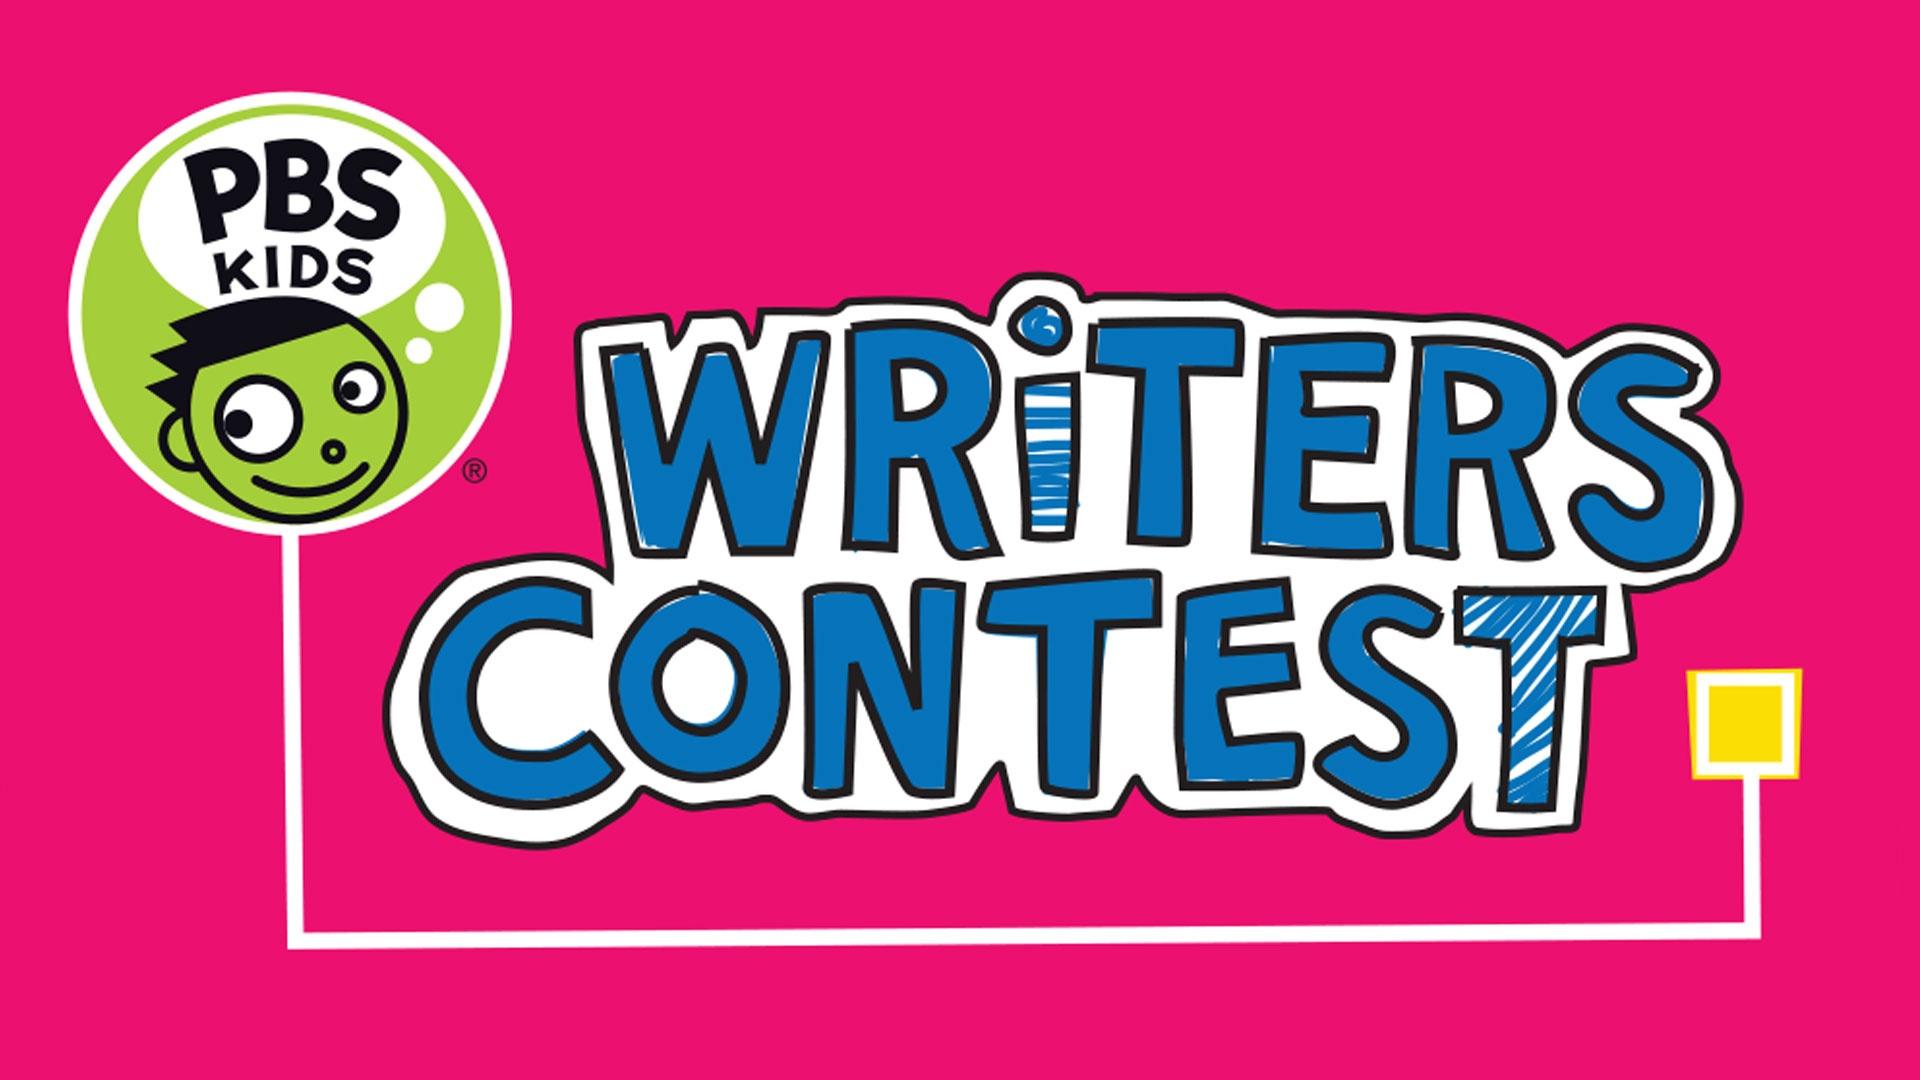 PBS Kids Writers Contest